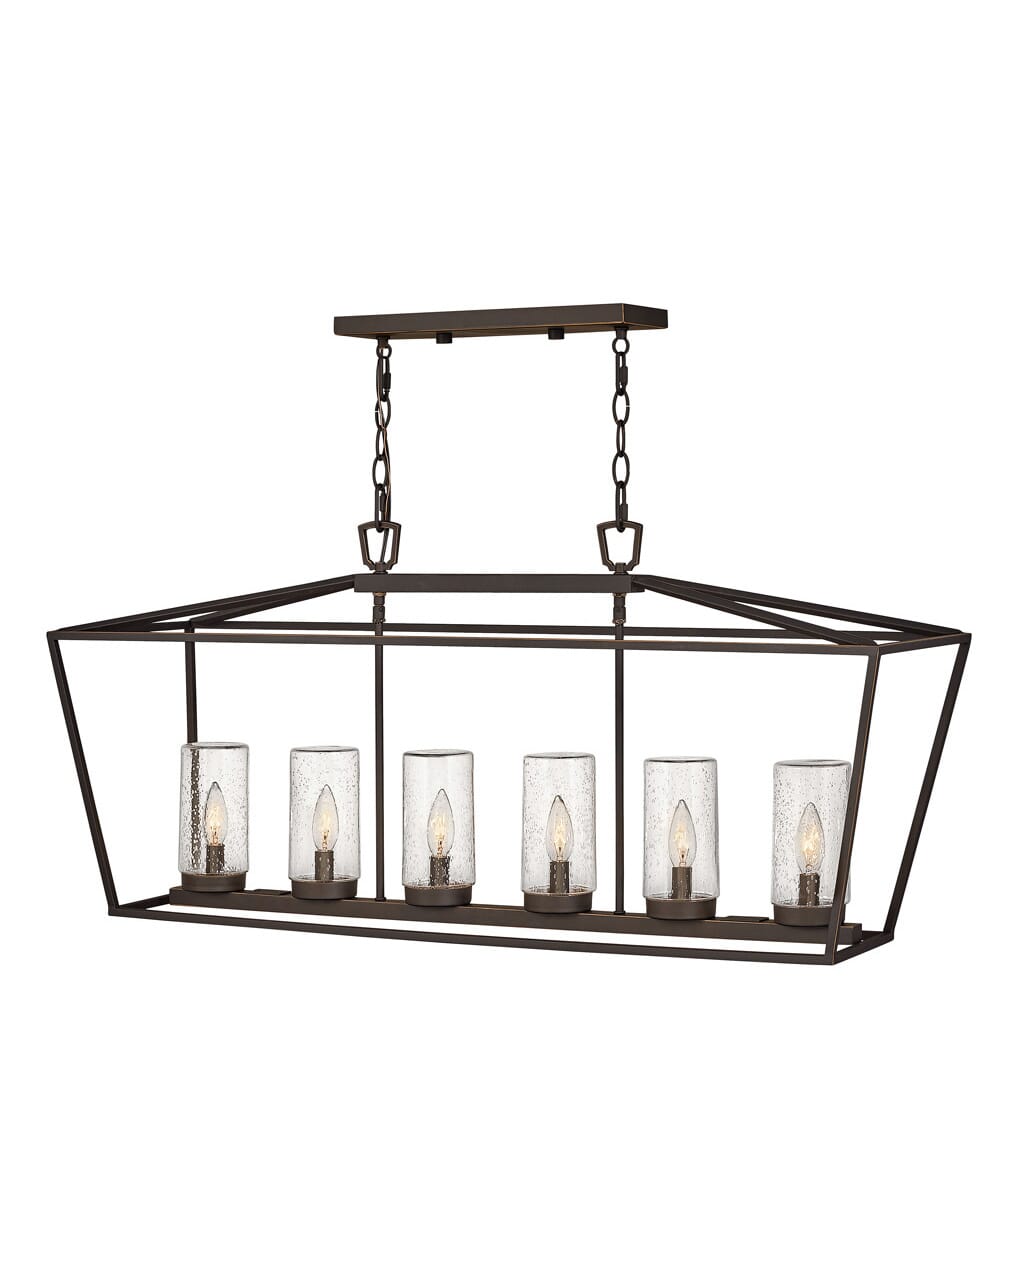 Alford Place 6-Light Outdoor Linear Chandelier In Oil Rubbed Bronze